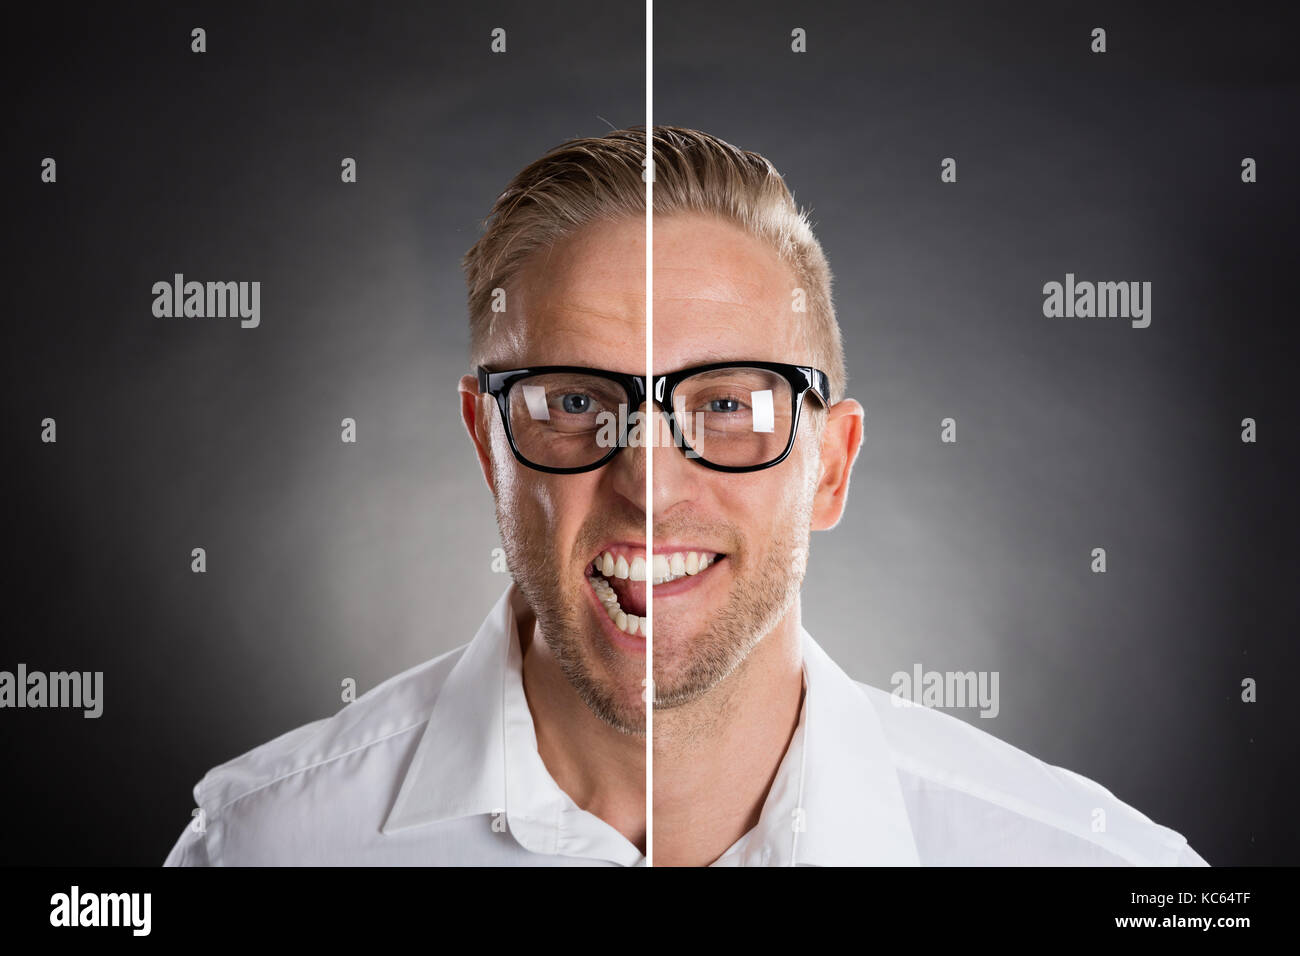 Man's Face Showing Anger And Happy Emotions Against Black Background Stock Photo